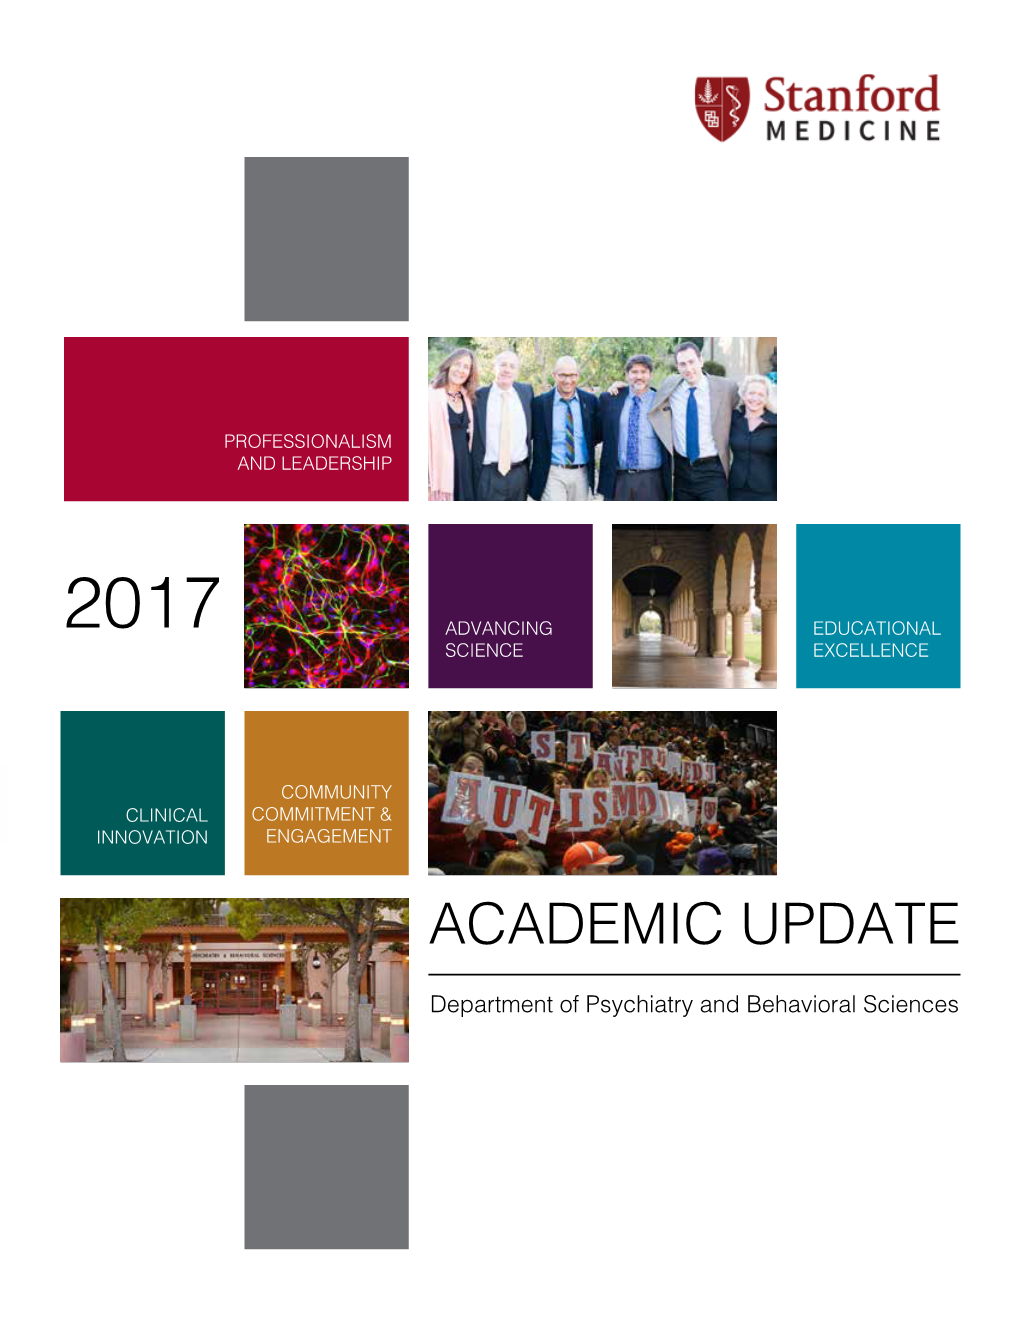 Download the 2017 Academic Update